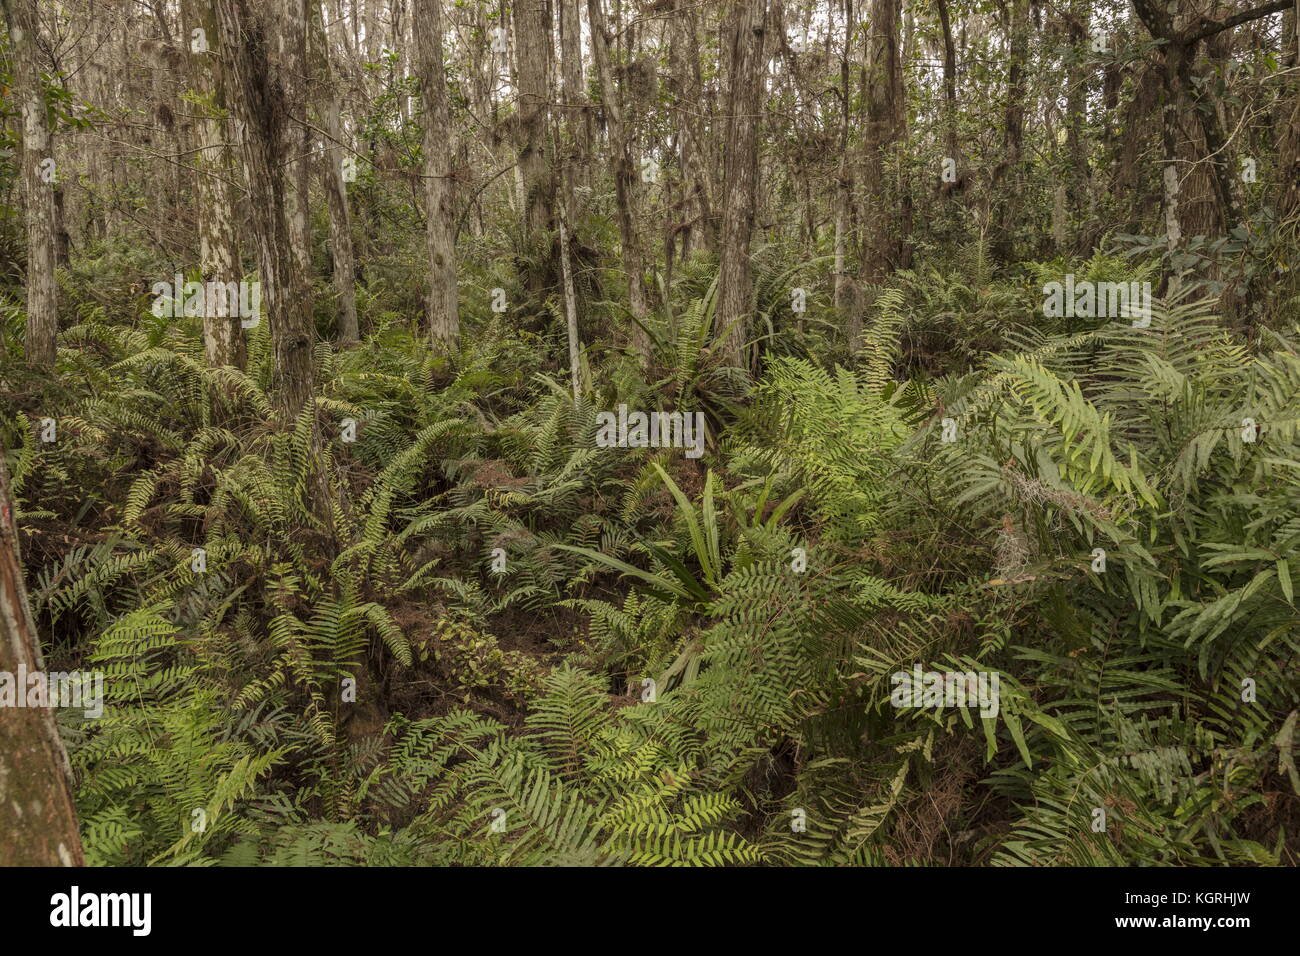 Swamp cypress swamps at Loxahatchee, with Swamp Fern, Strap Fern and Royal Fern. Everglades, Florida. Arthur R. Marshall Loxahatchee National Wildlife Stock Photo